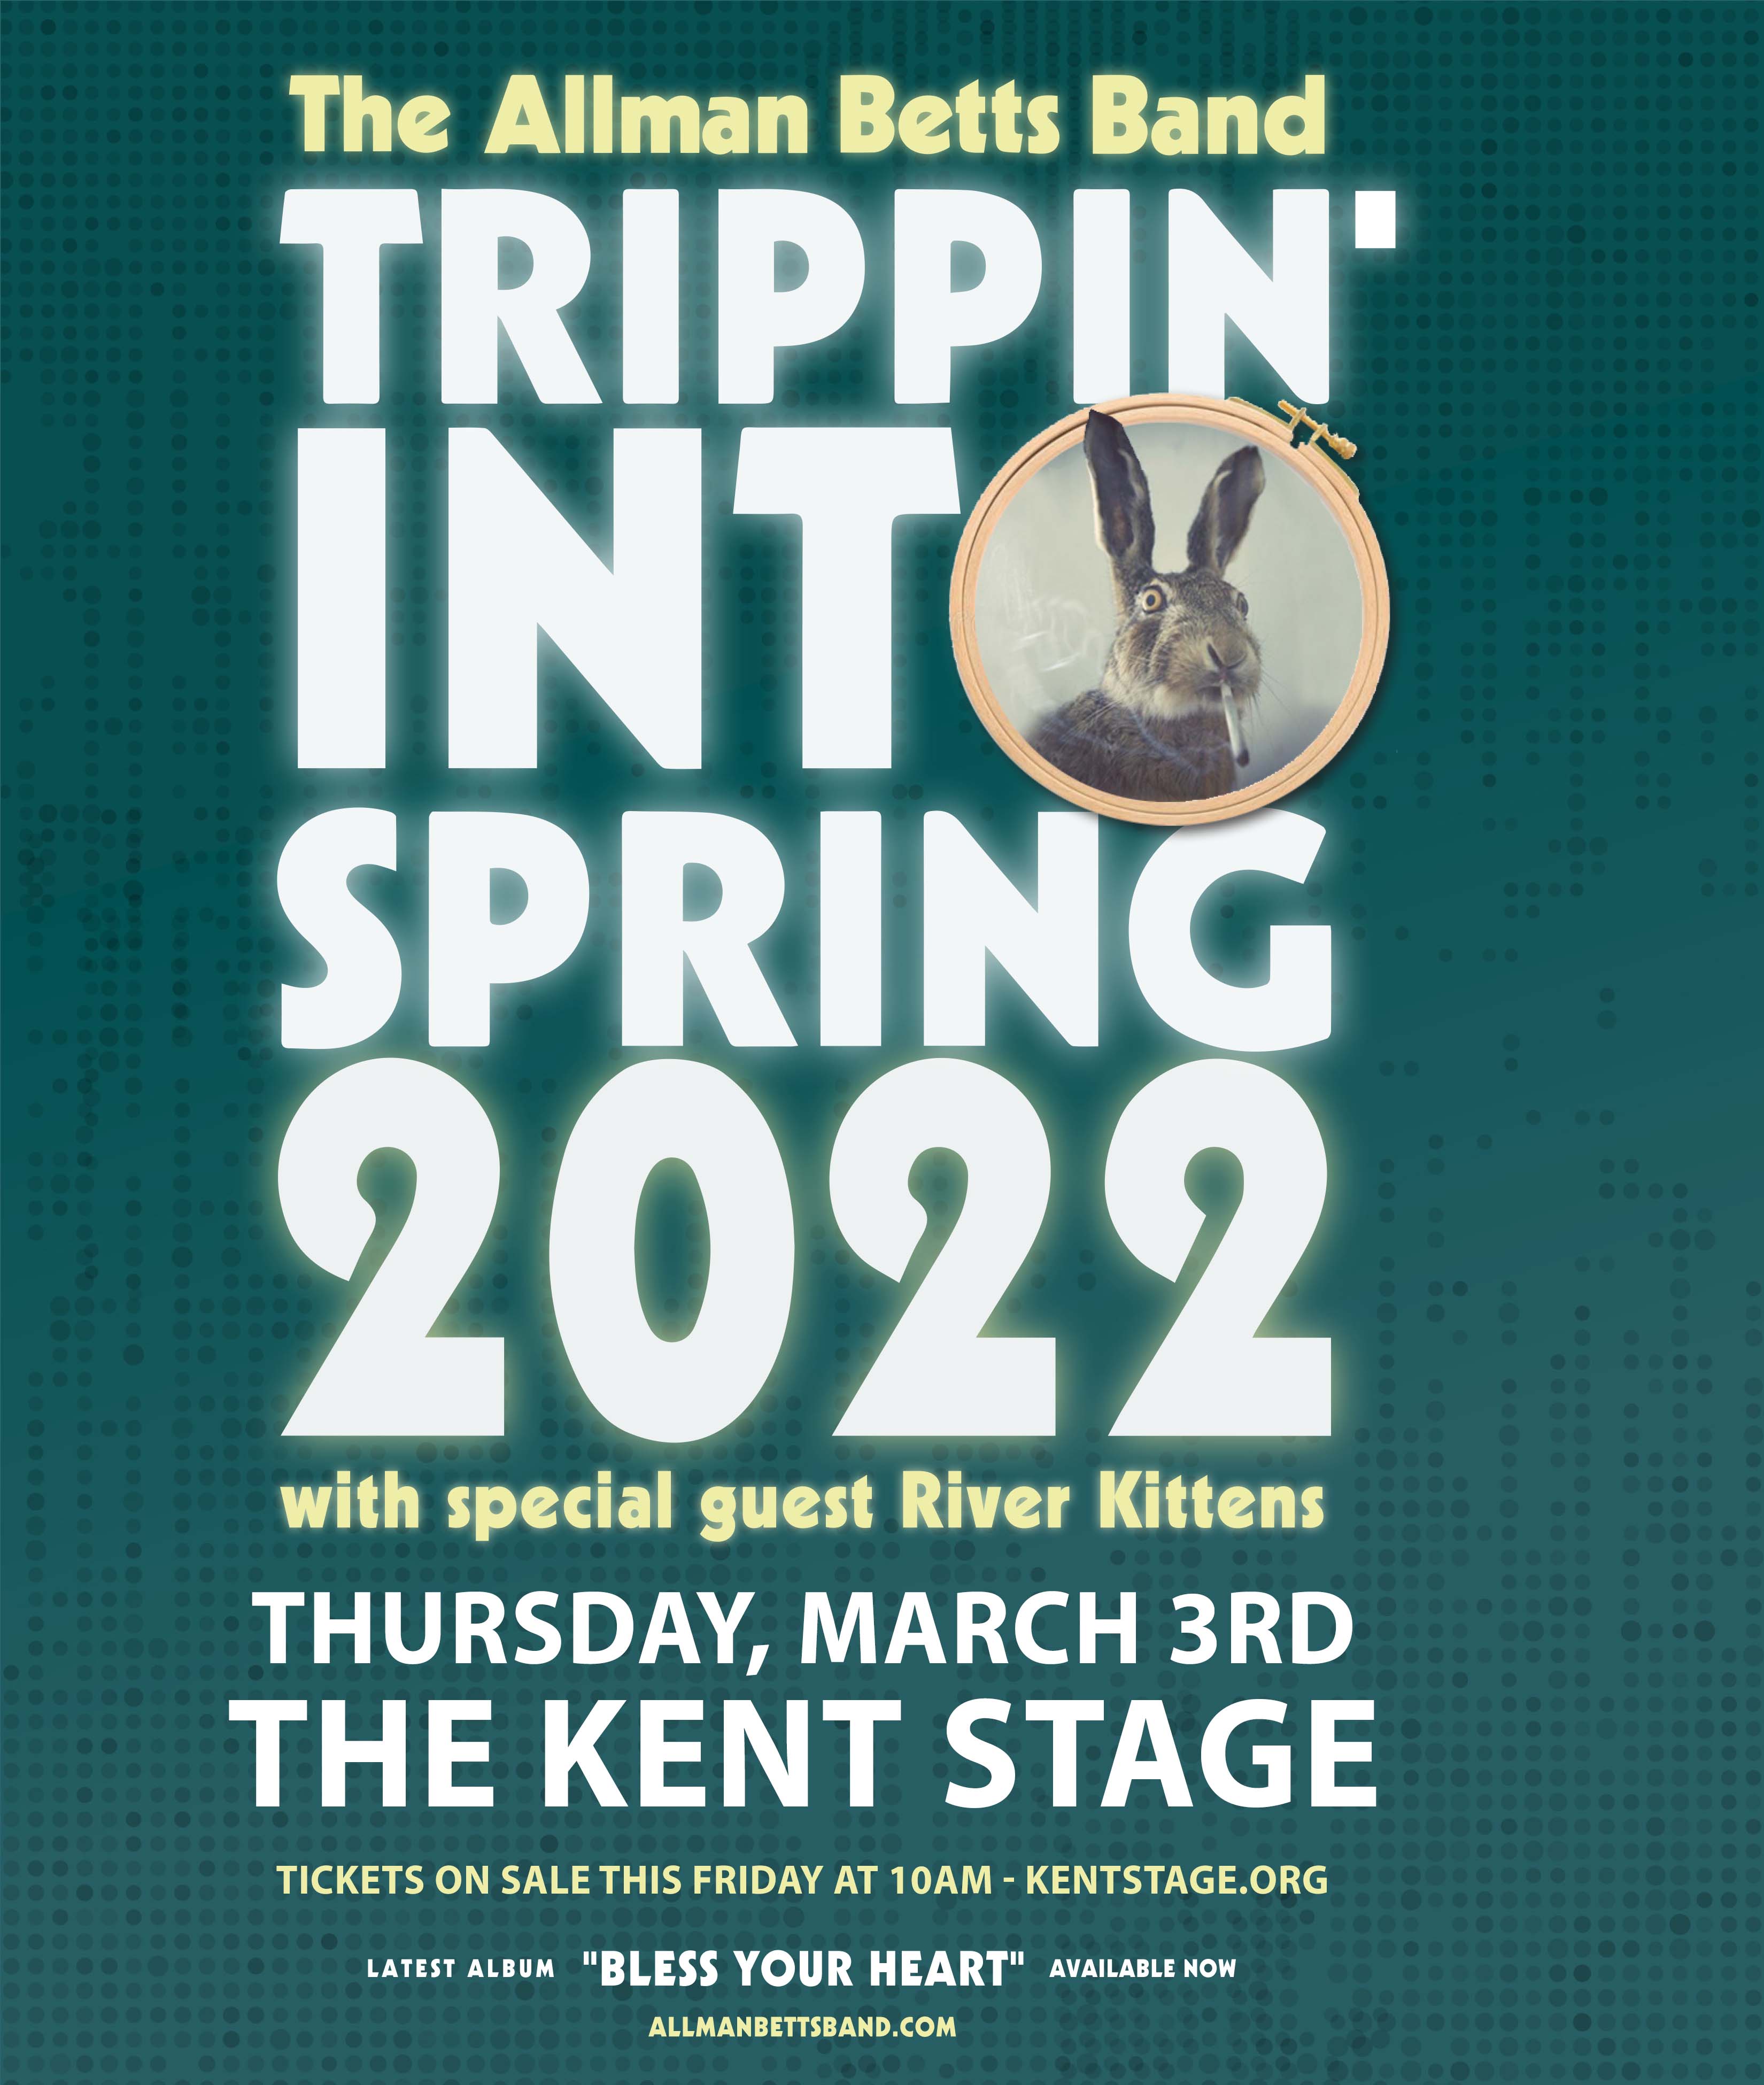 Kent Stage Schedule 2022 The Kent Stage В Twitter: "New Show Announced! The Allman Betts Band With  Special Guest River Kittens Live At The Kent Stage - Thursday March 3Rd,  2022 Tickets Go On Sale Friday,